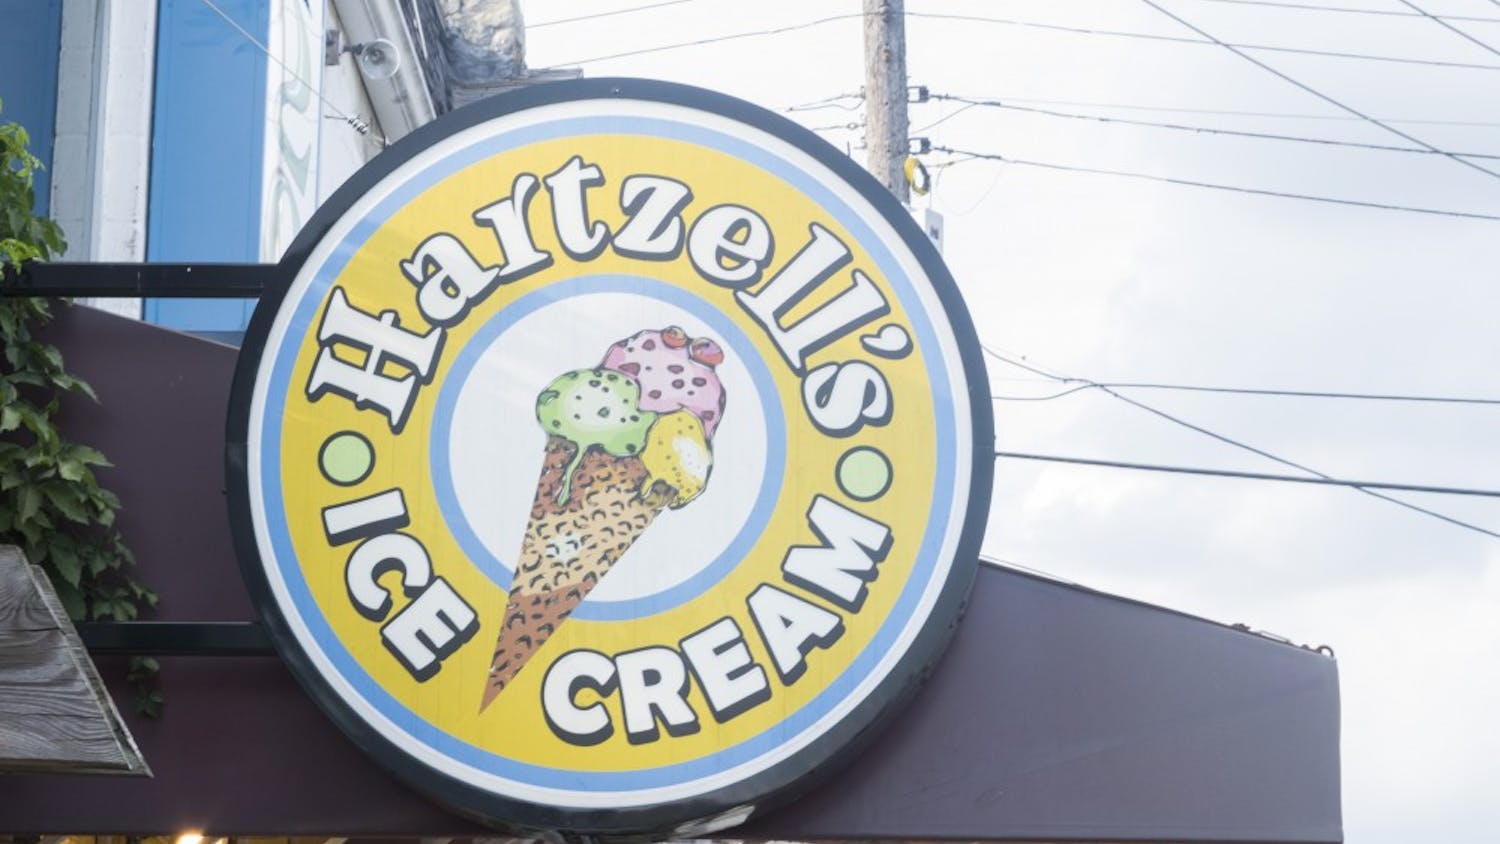 Located on Dunn Street, Hartnell's offers a variety of homemade flavors.&nbsp;